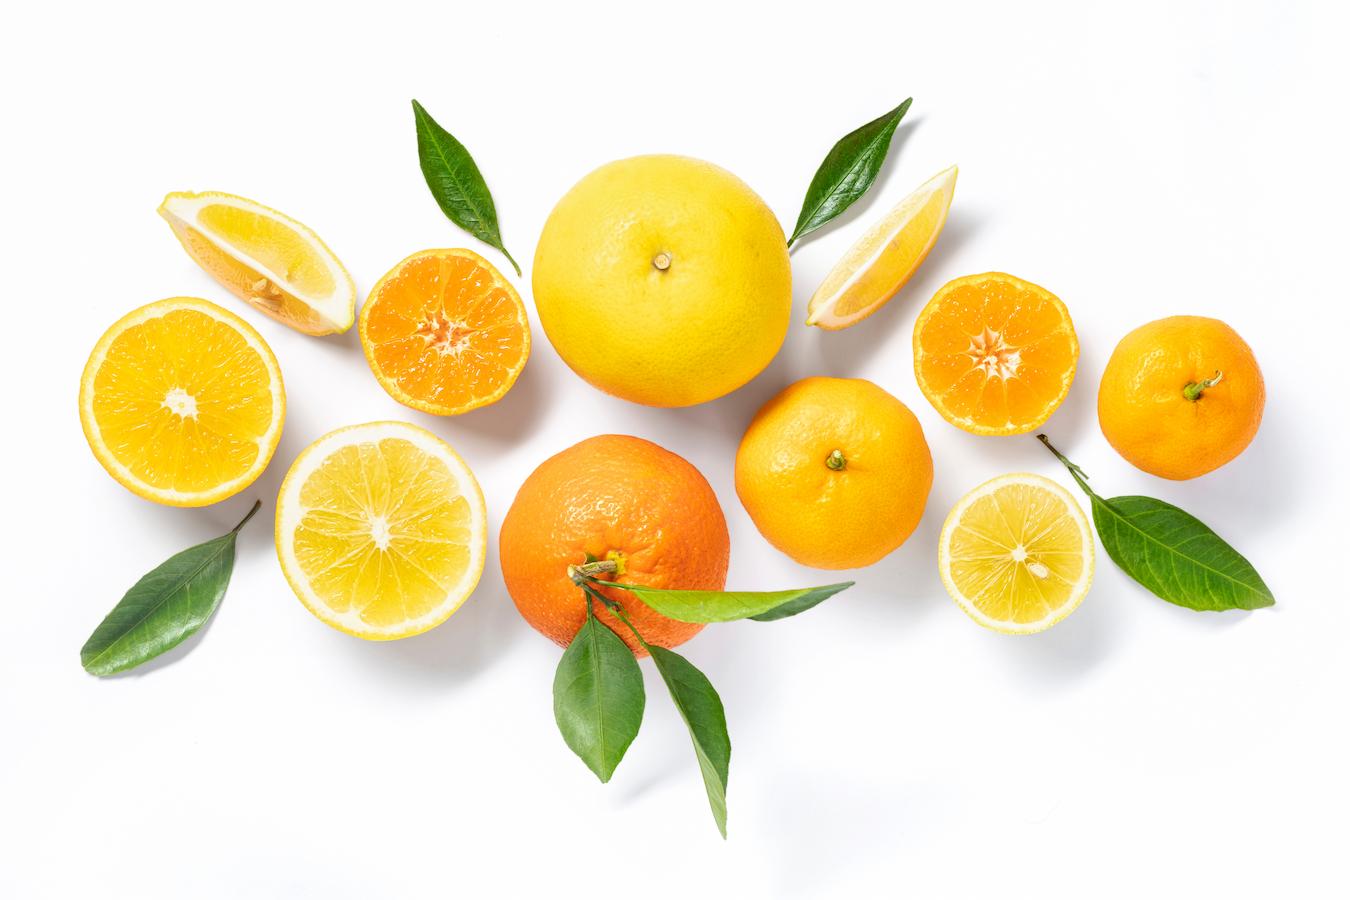 oranges and lemons on a white background green tea fermented vegetables body produces stay healthy